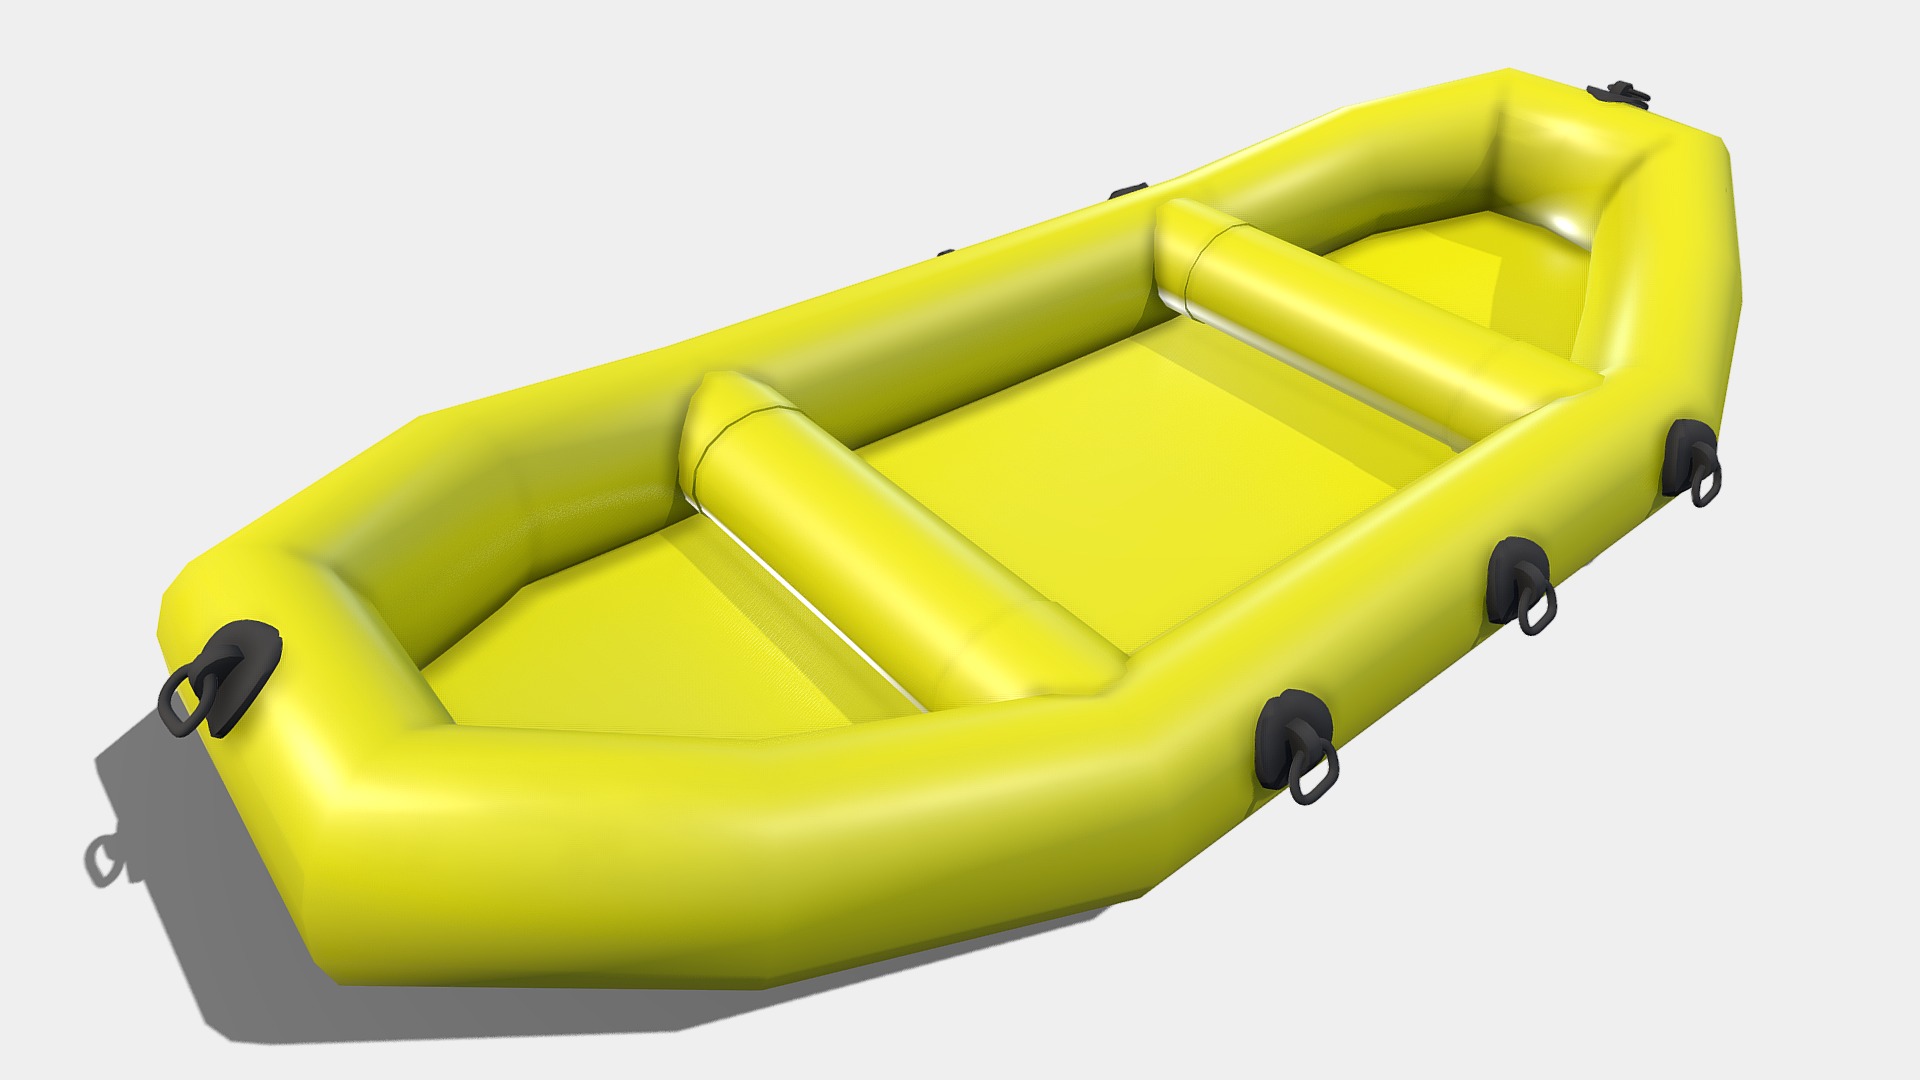 3D model Rubber Boat - This is a 3D model of the Rubber Boat. The 3D model is about a yellow and green boat.